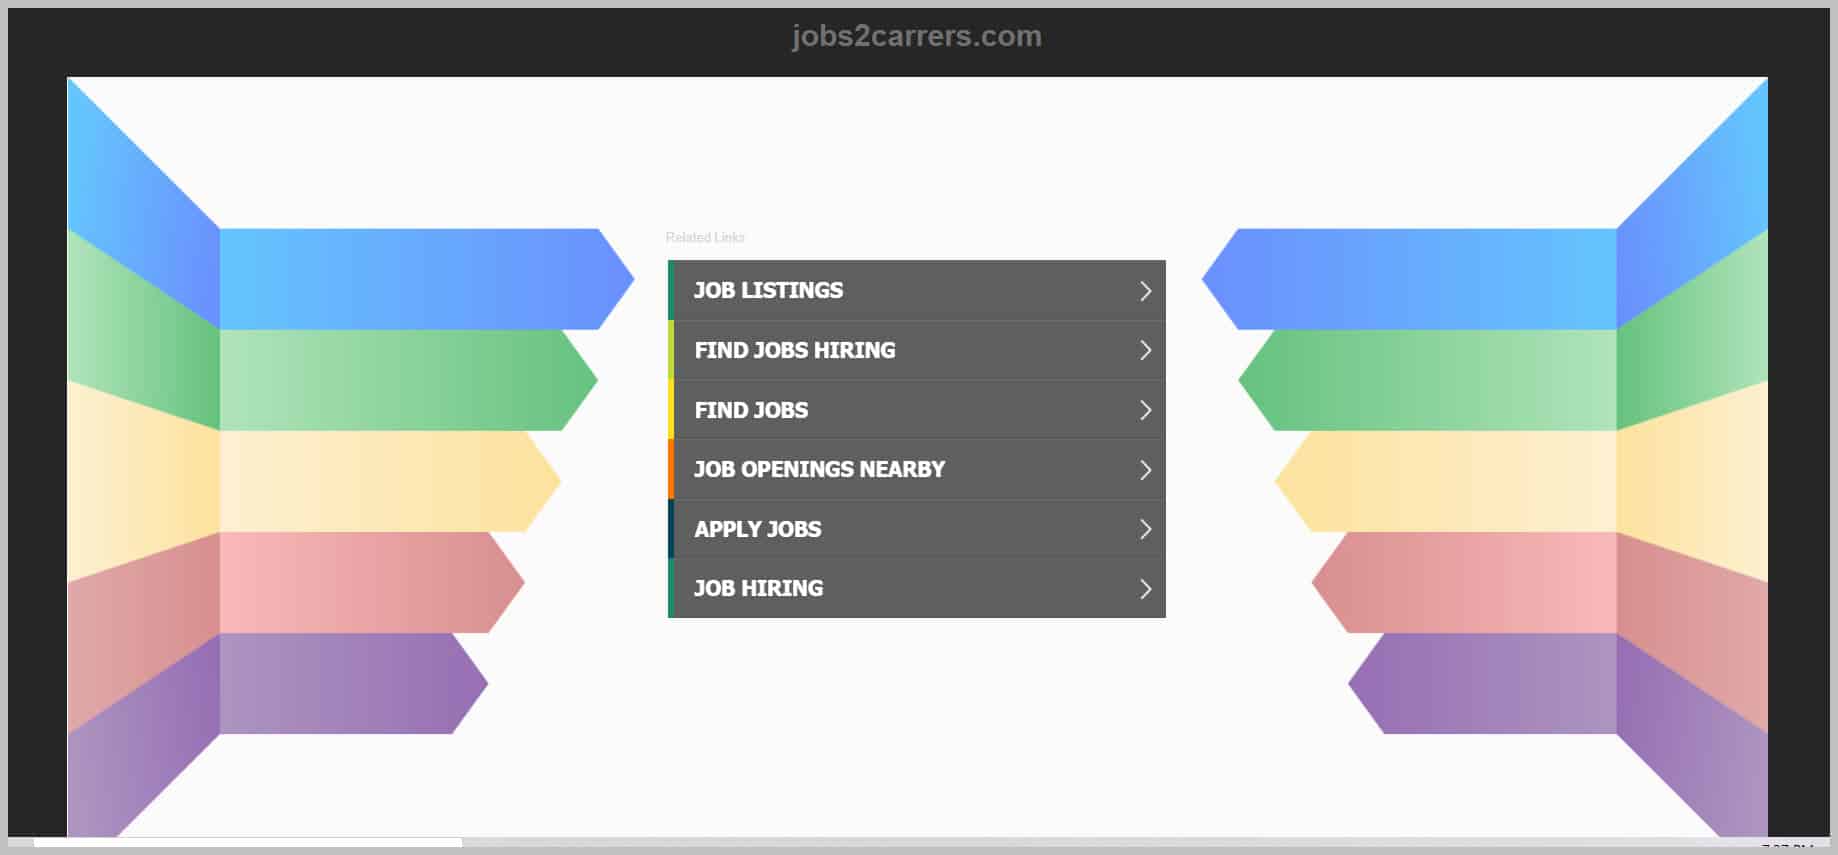 Jobs2Careers Home Page